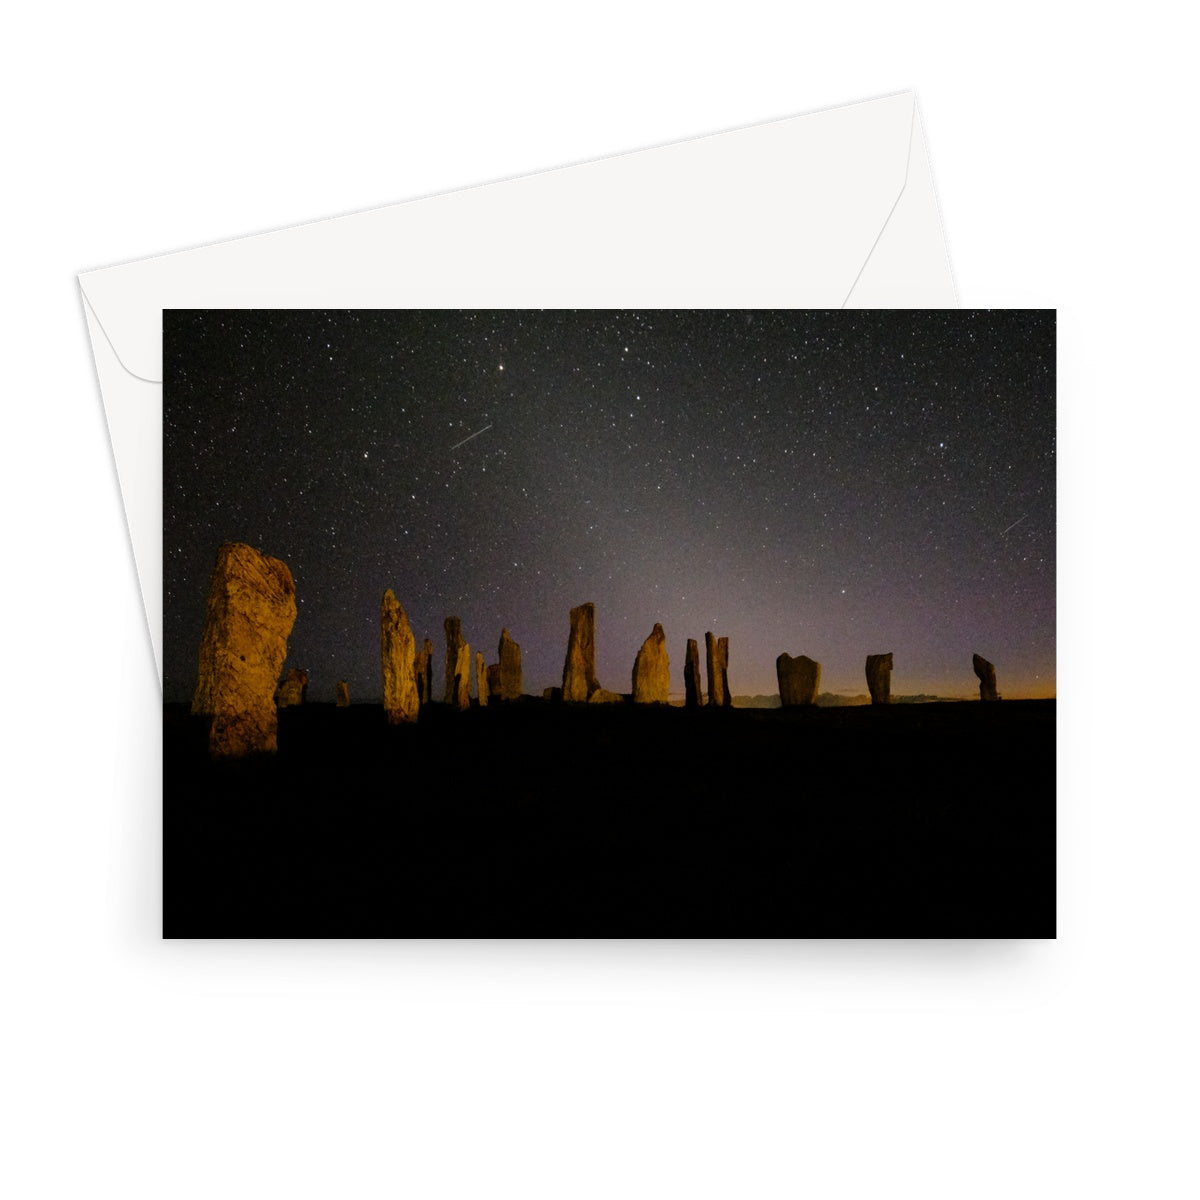 Callanish and Zodiacal light Greeting Card